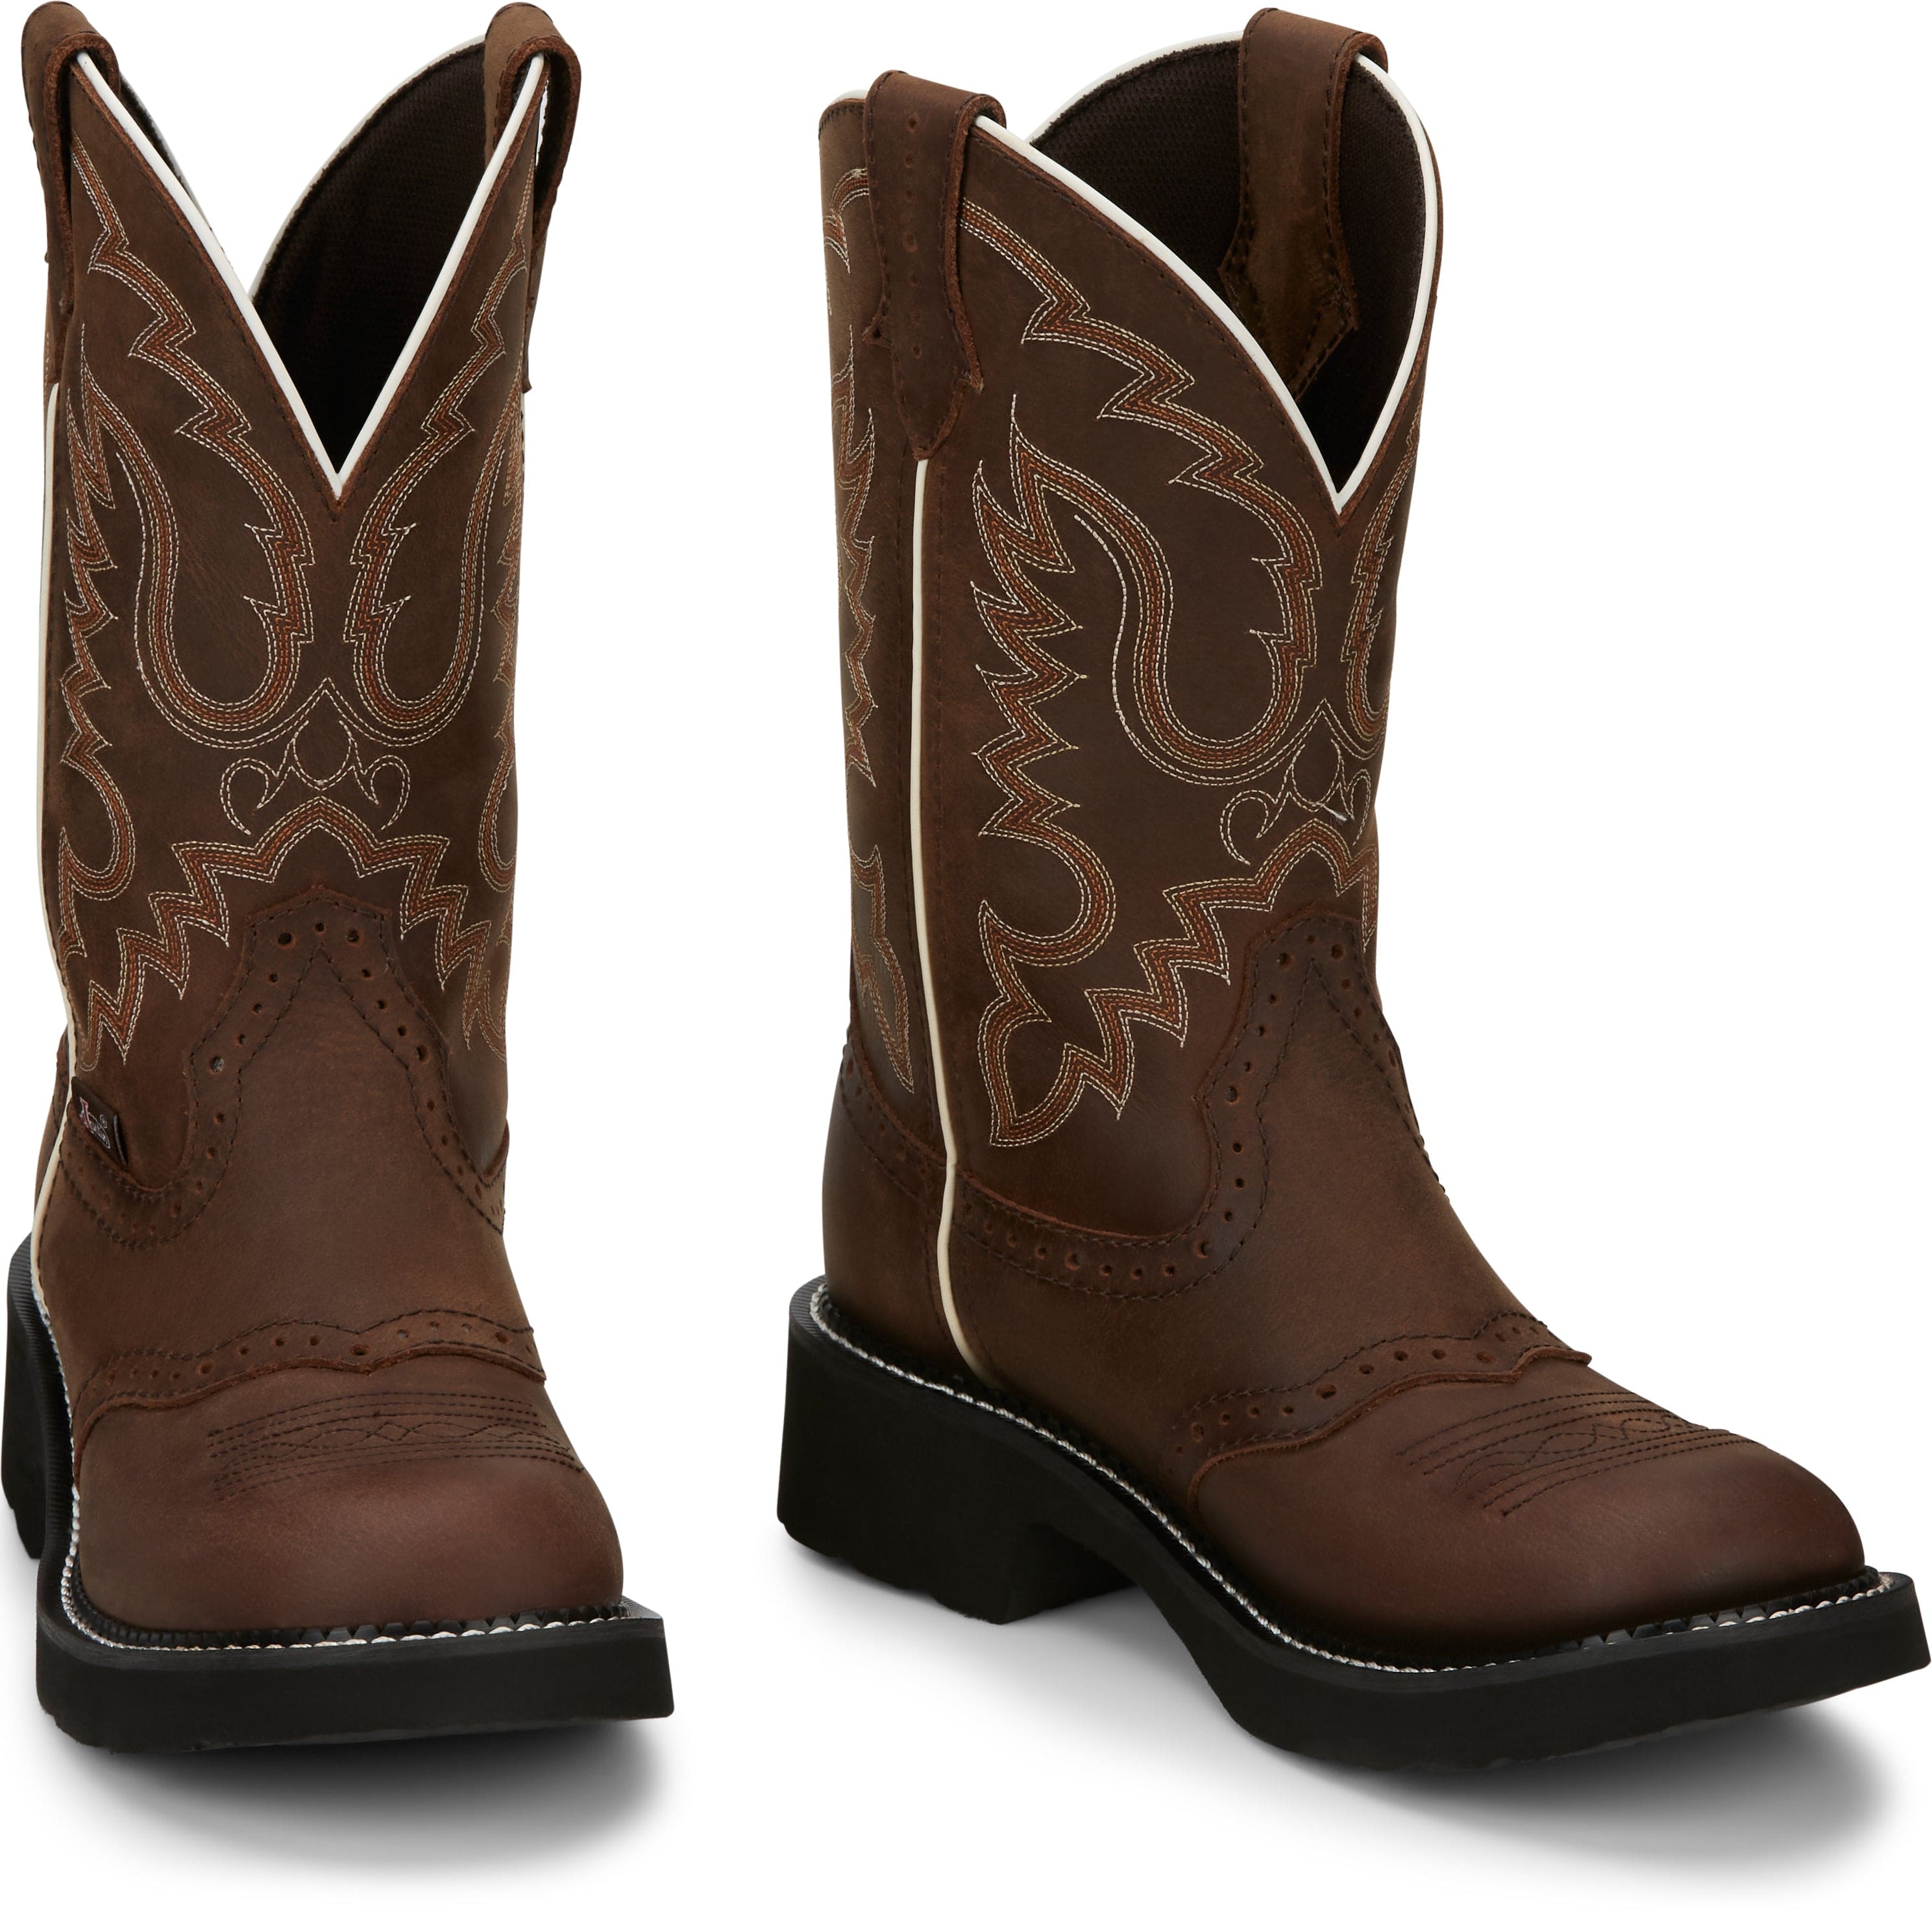 Justin Women's Gypsy Inji Aged Bark Traditional Cowgirl Boots 